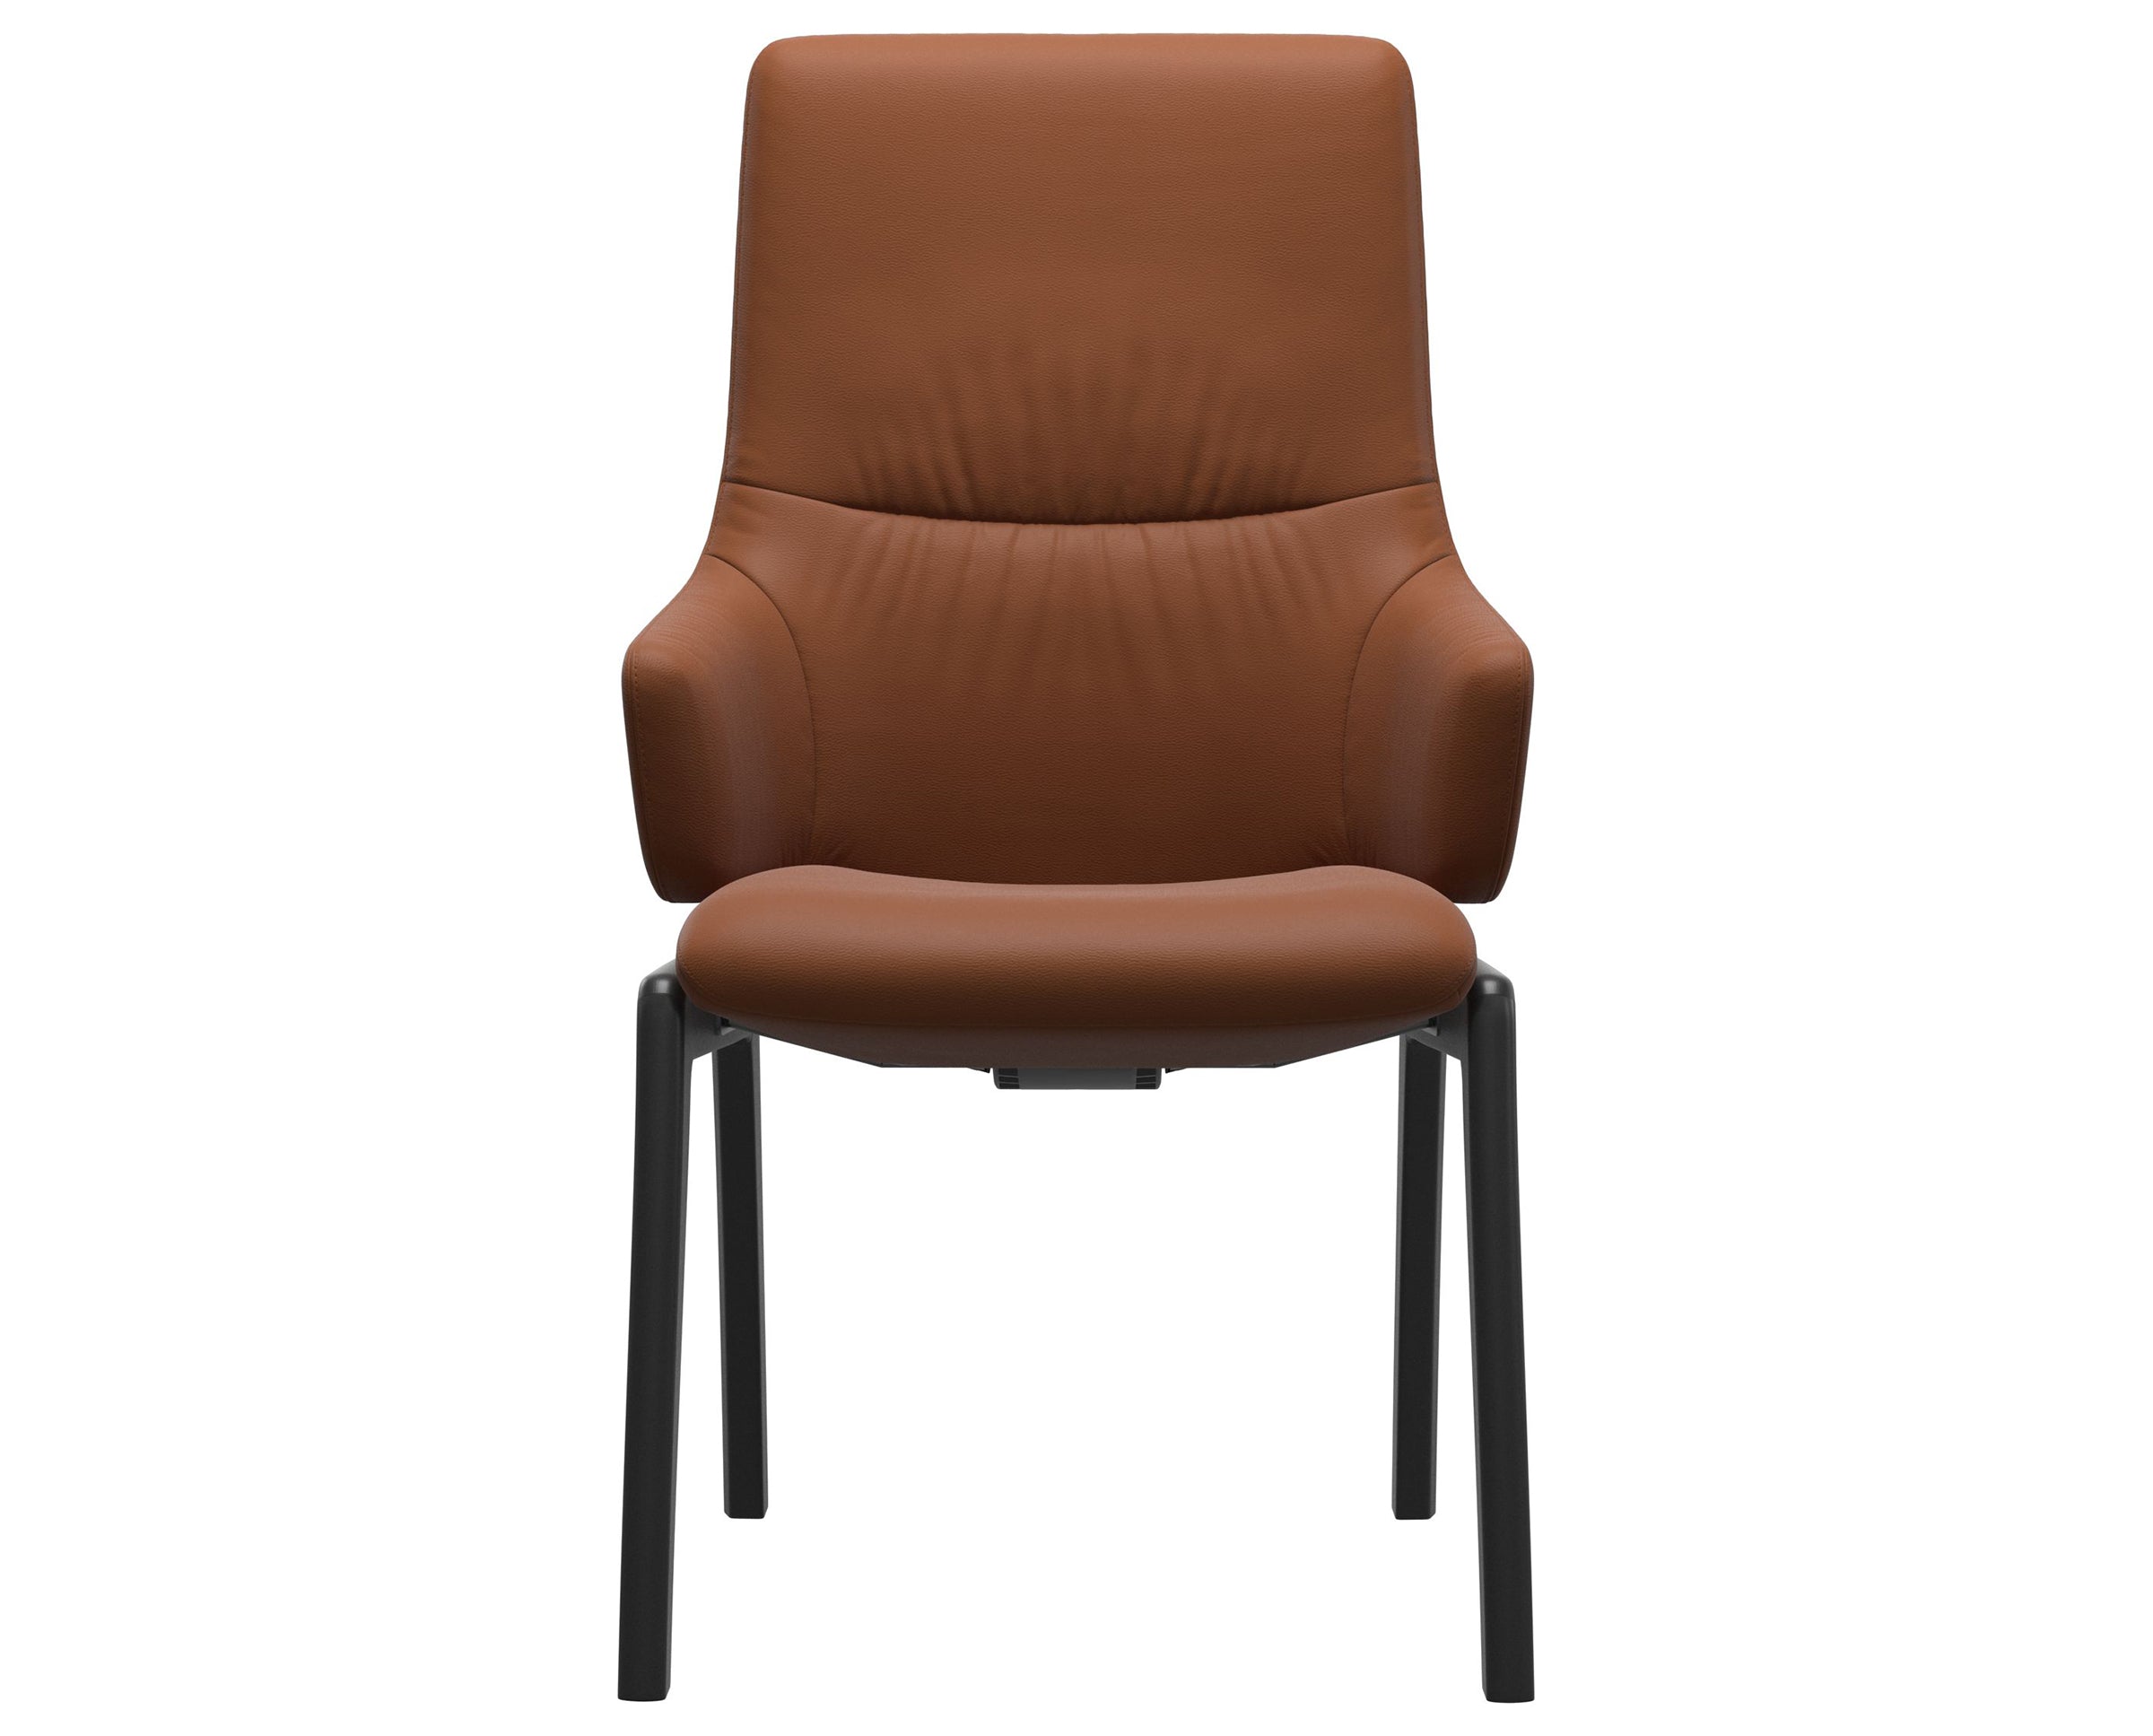 Paloma Leather New Cognac and Black Base | Stressless Mint High Back D100 Dining Chair w/Arms | Valley Ridge Furniture